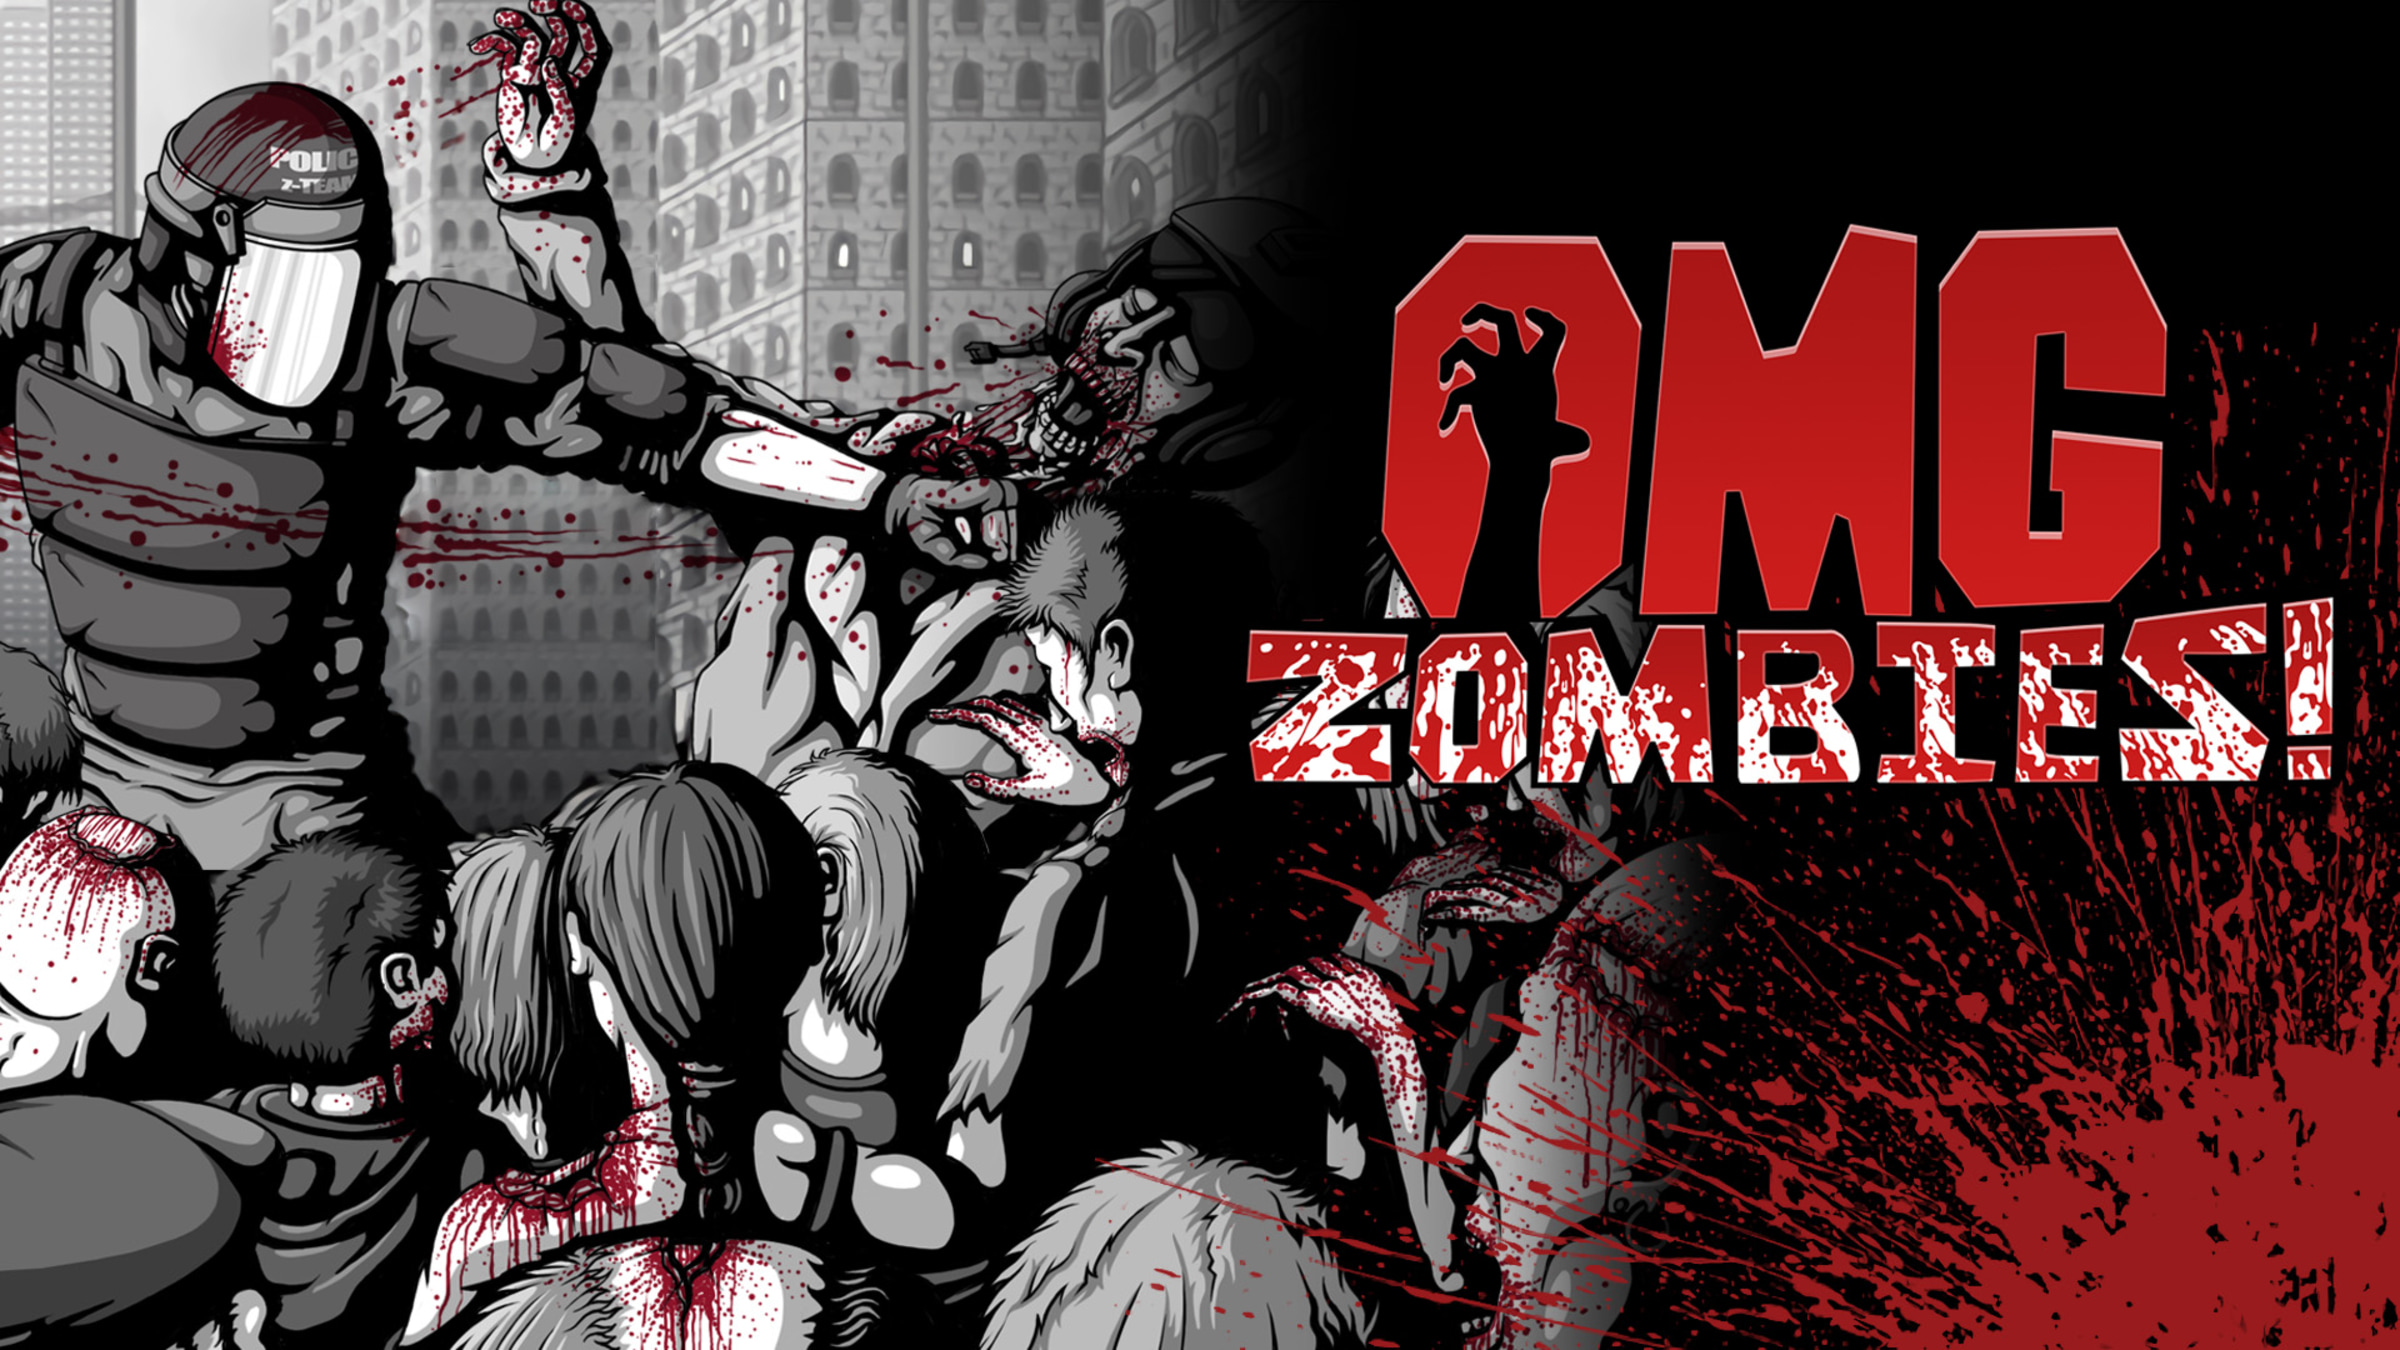 What The Zombies?! for Nintendo Switch - Nintendo Official Site